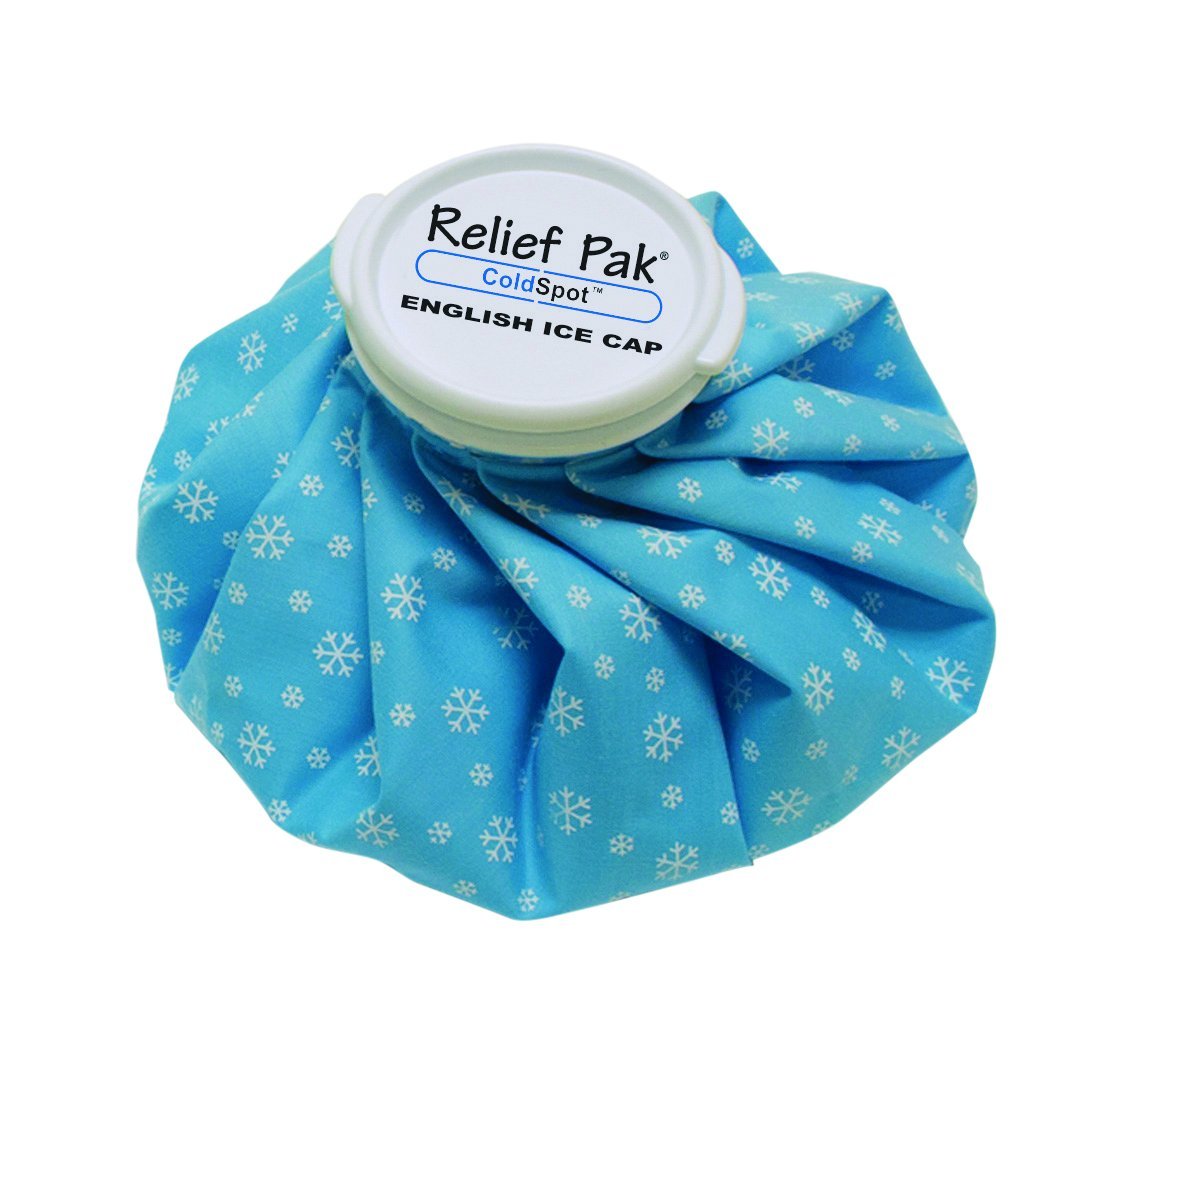 Back in stock! English Ice Cap Reusable Ice Bag, 9″ Diameter – Just $3.96!